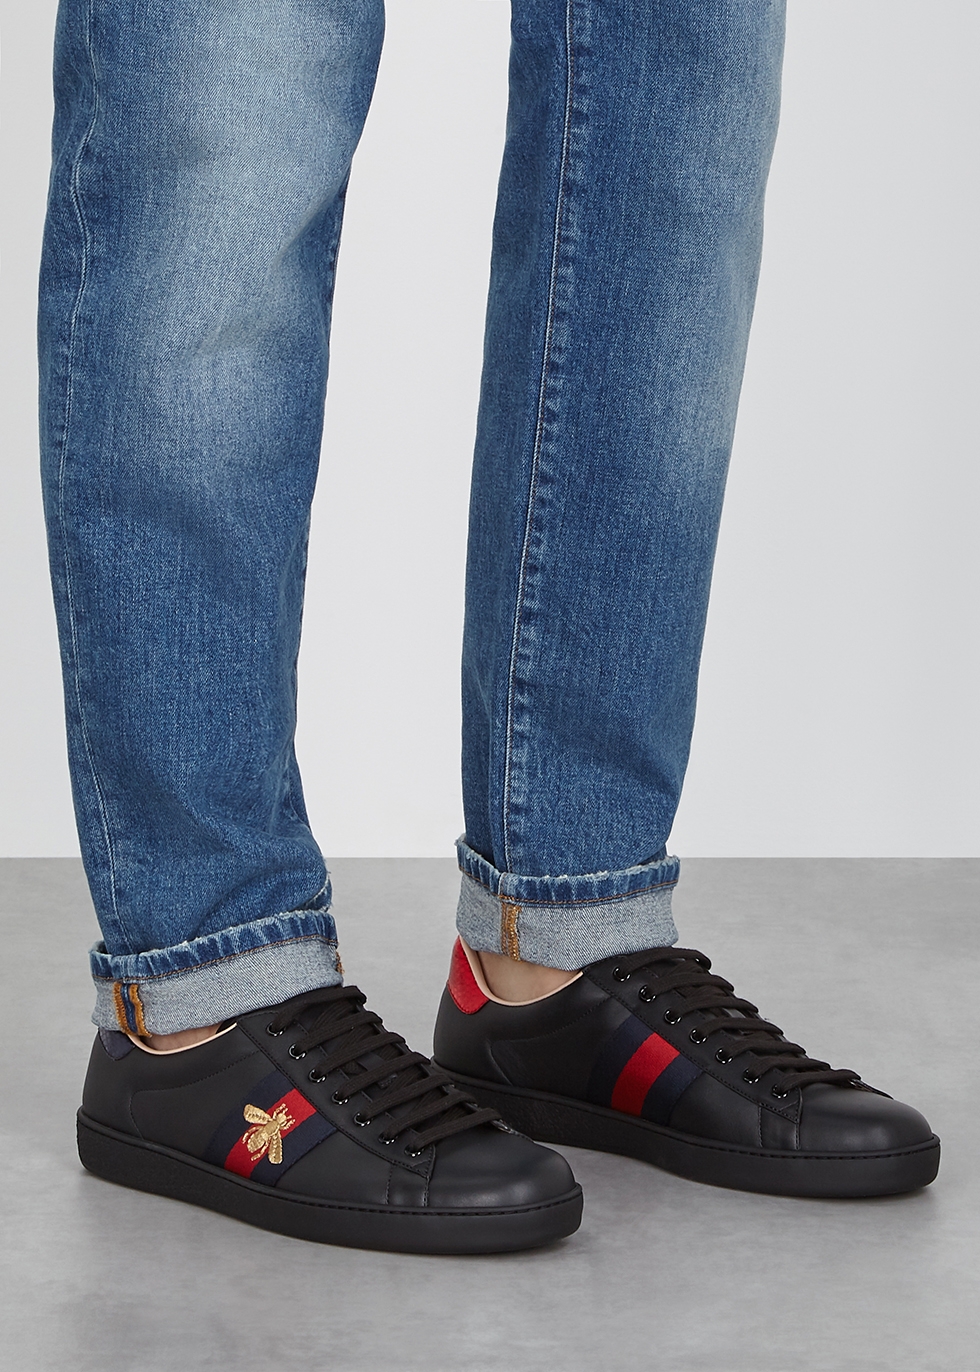 Gucci Ace black embroidered leather 